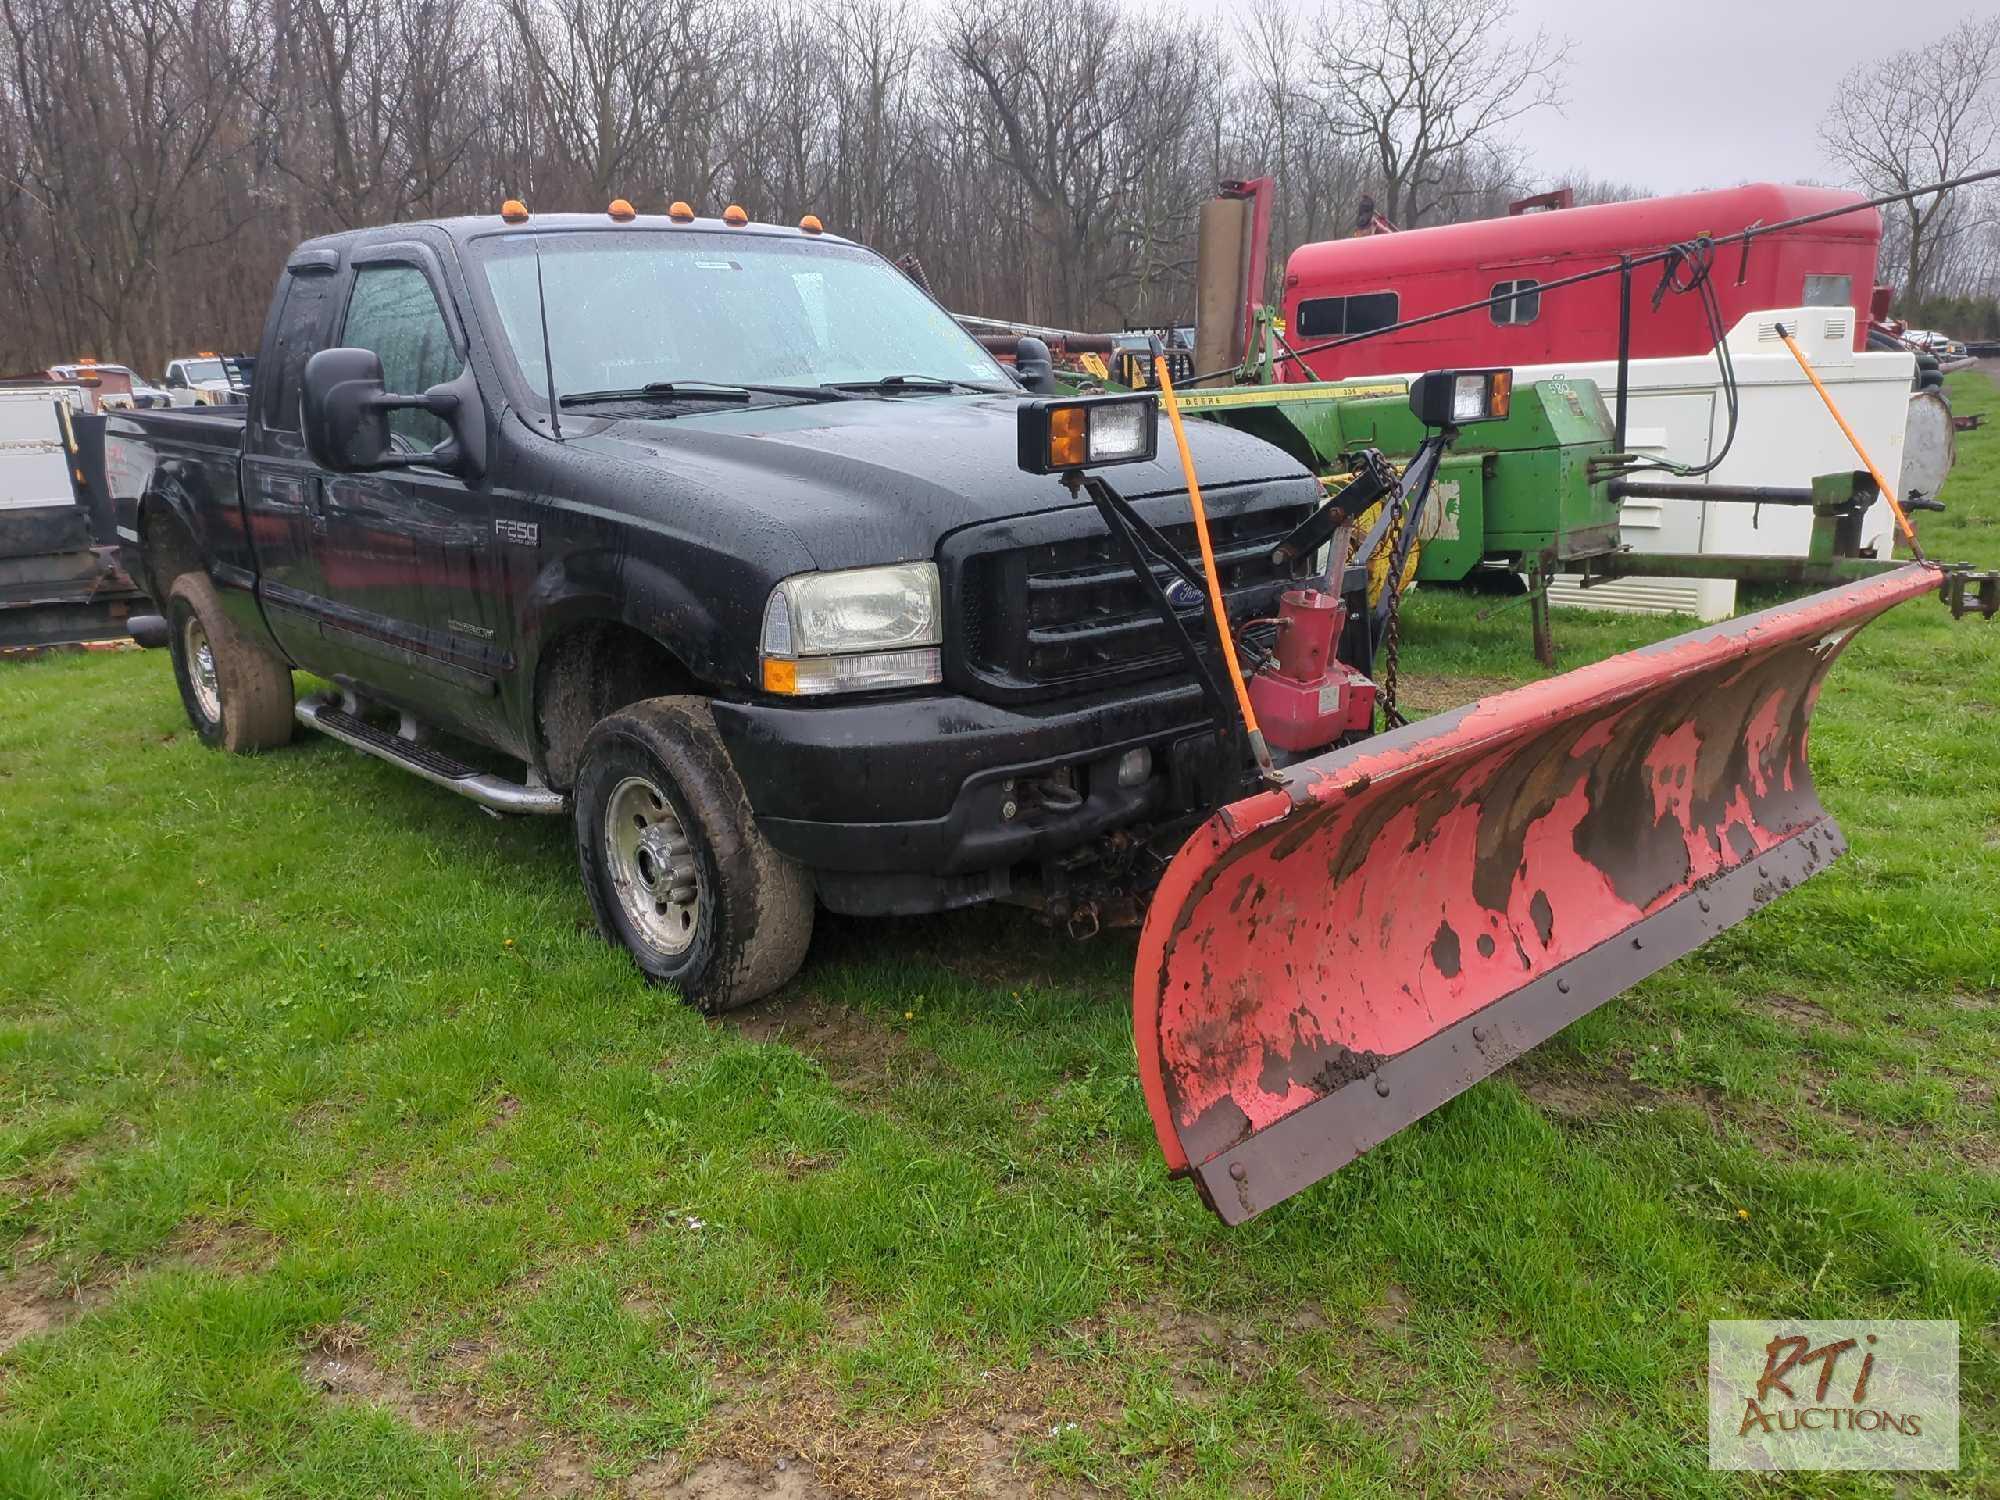 2003 Ford F250 Super Duty extended cab pickup, Western 7.5ft plow, 4WD, PW, PL, A/C, 310K miles,